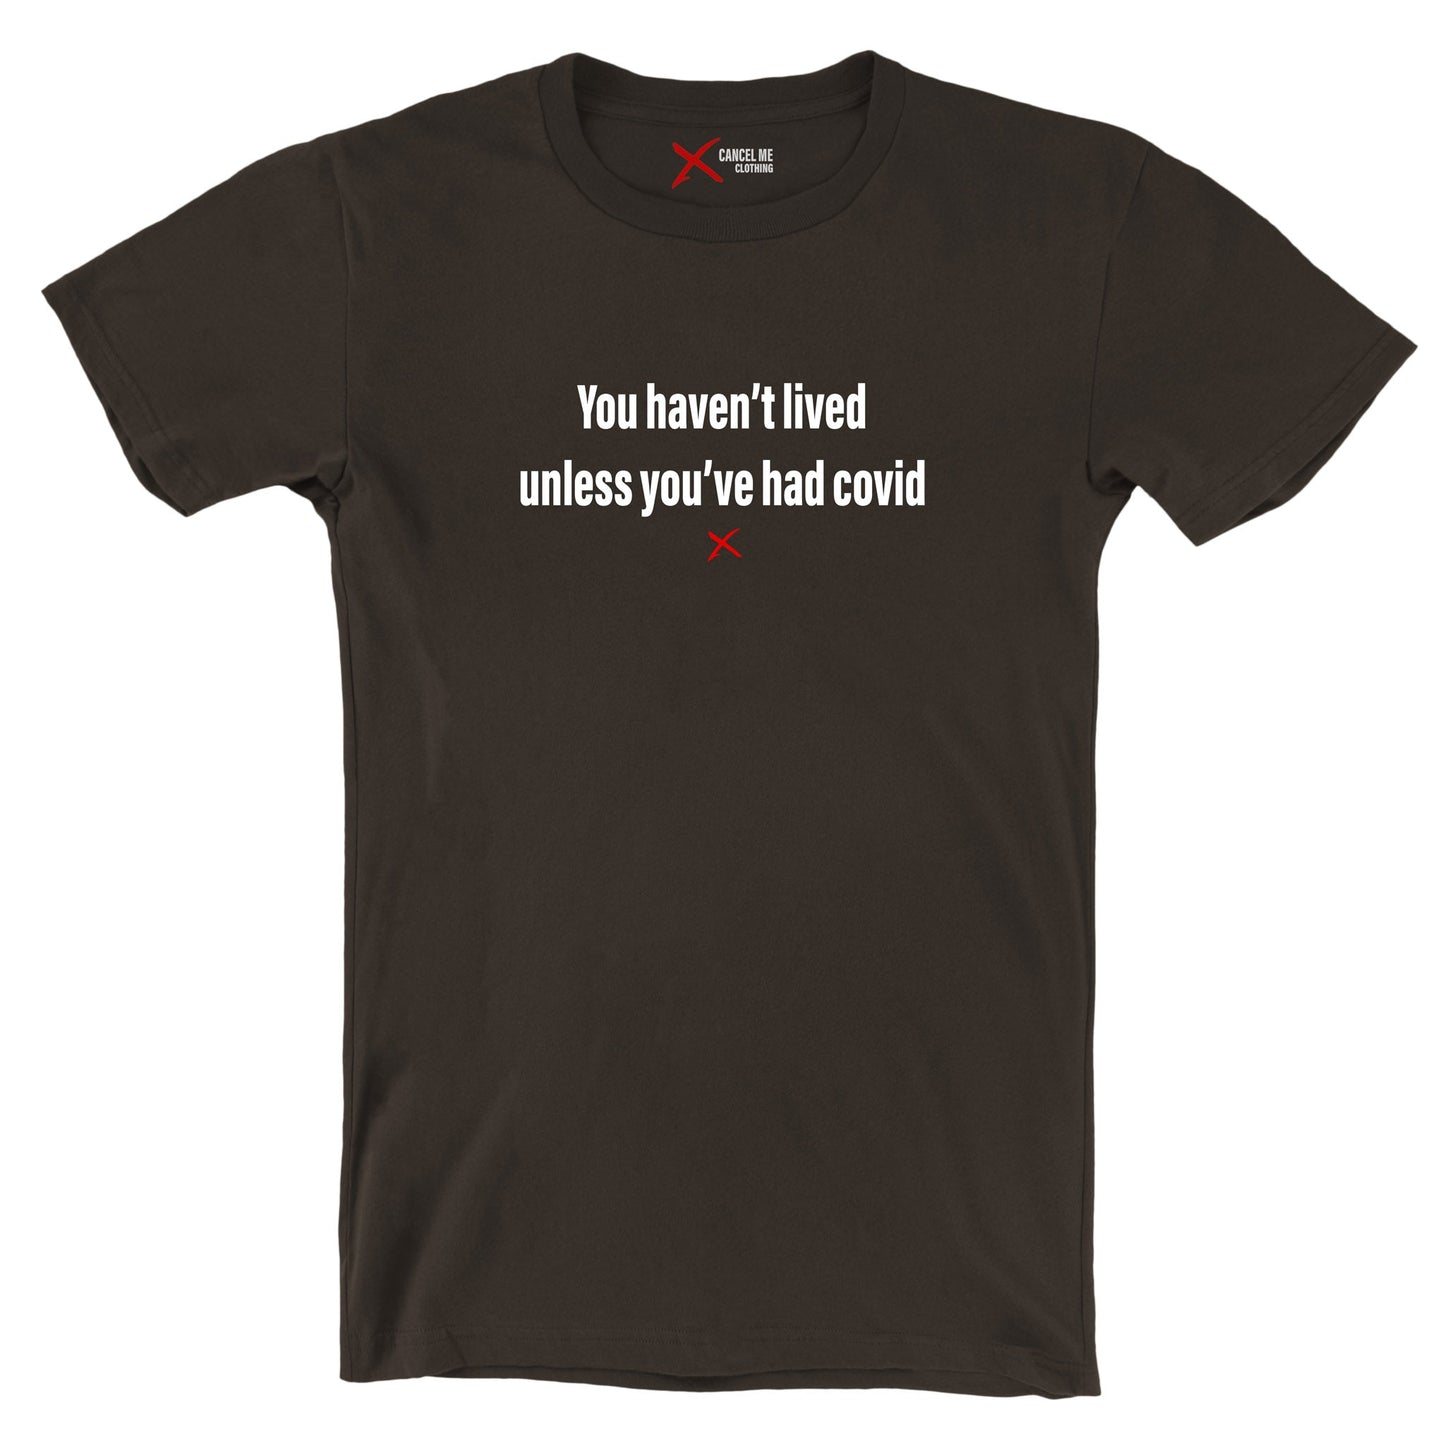 You haven't lived unless you've had covid - Shirt